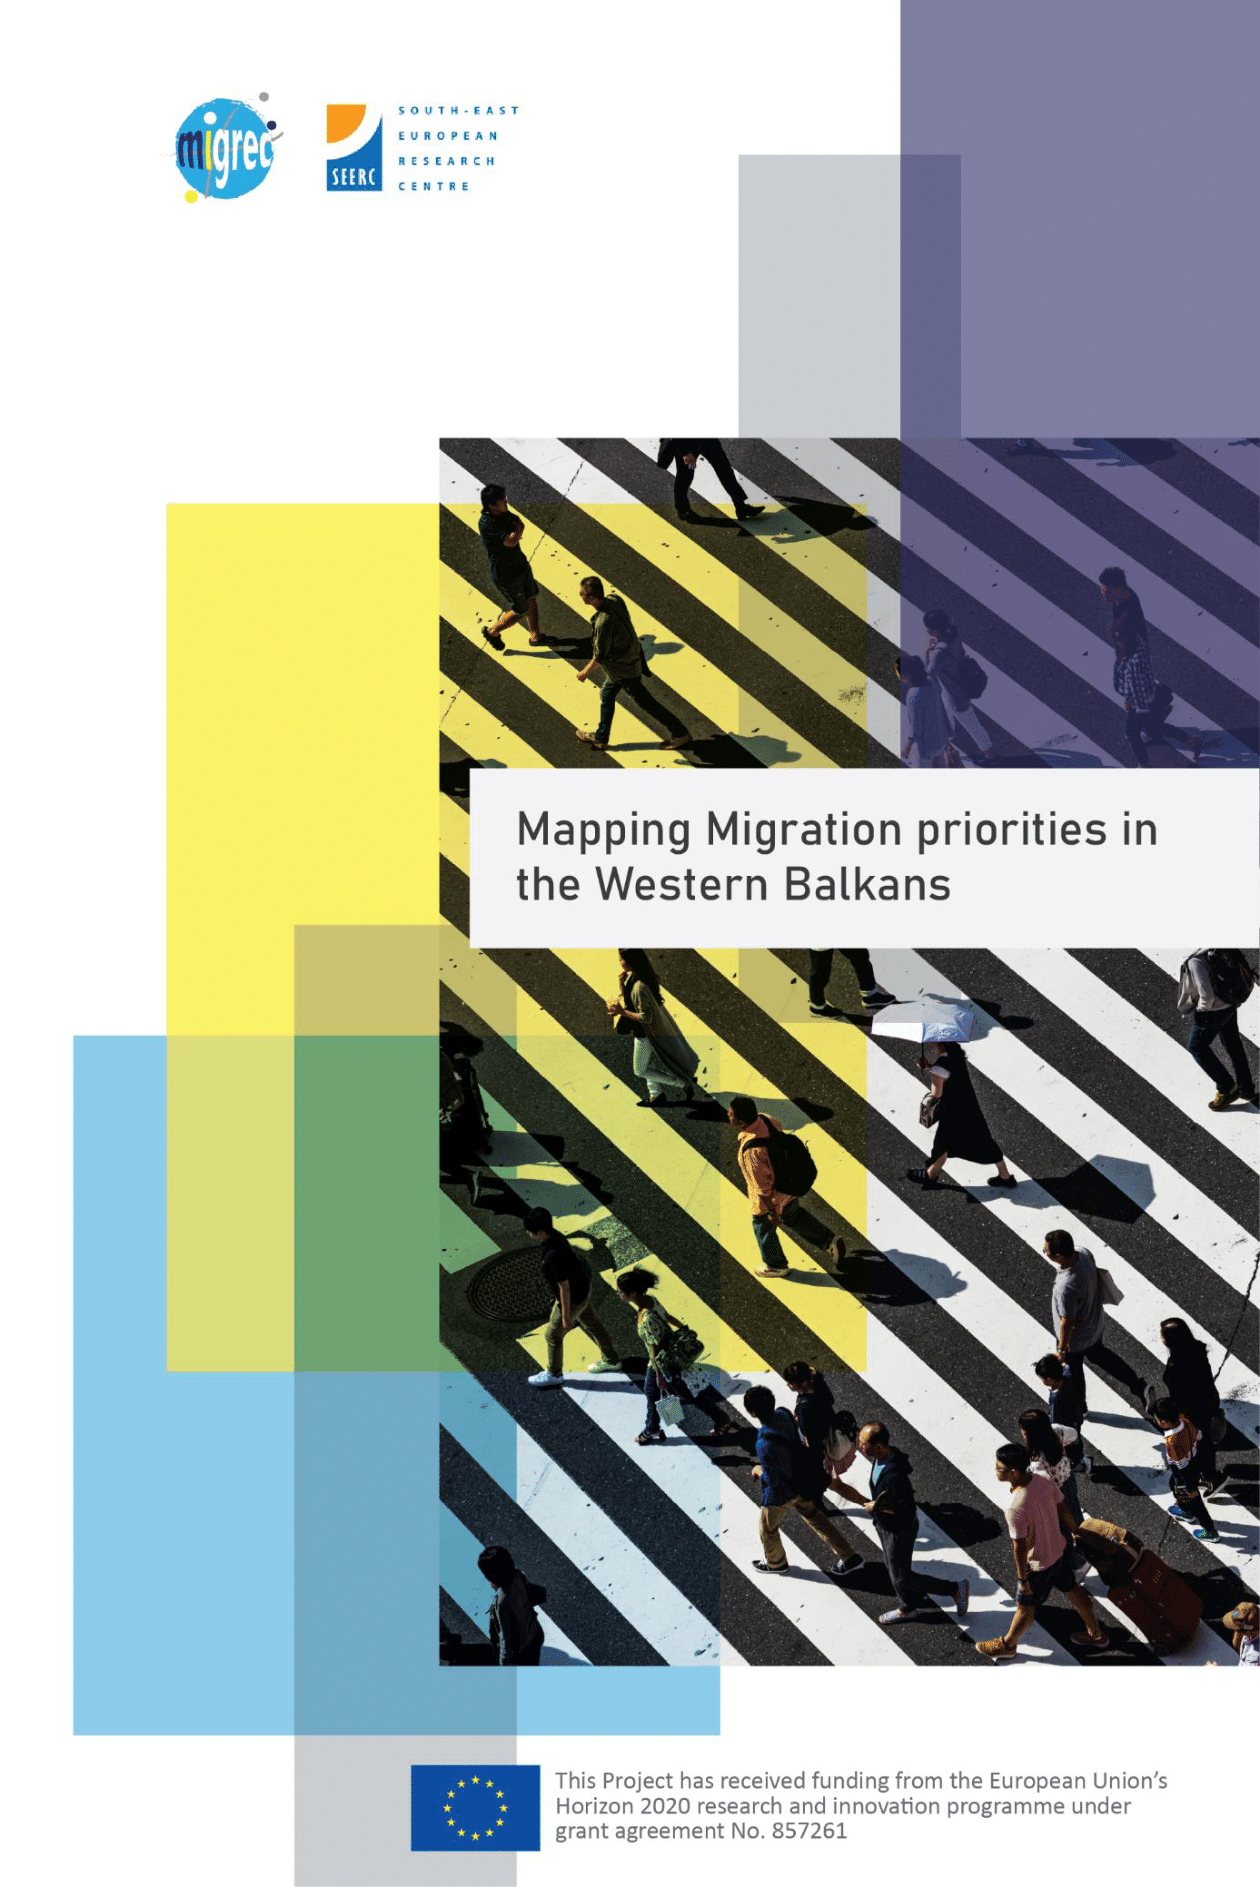 MIGREC Publication: Mapping Migration priorities in the Western Balkans